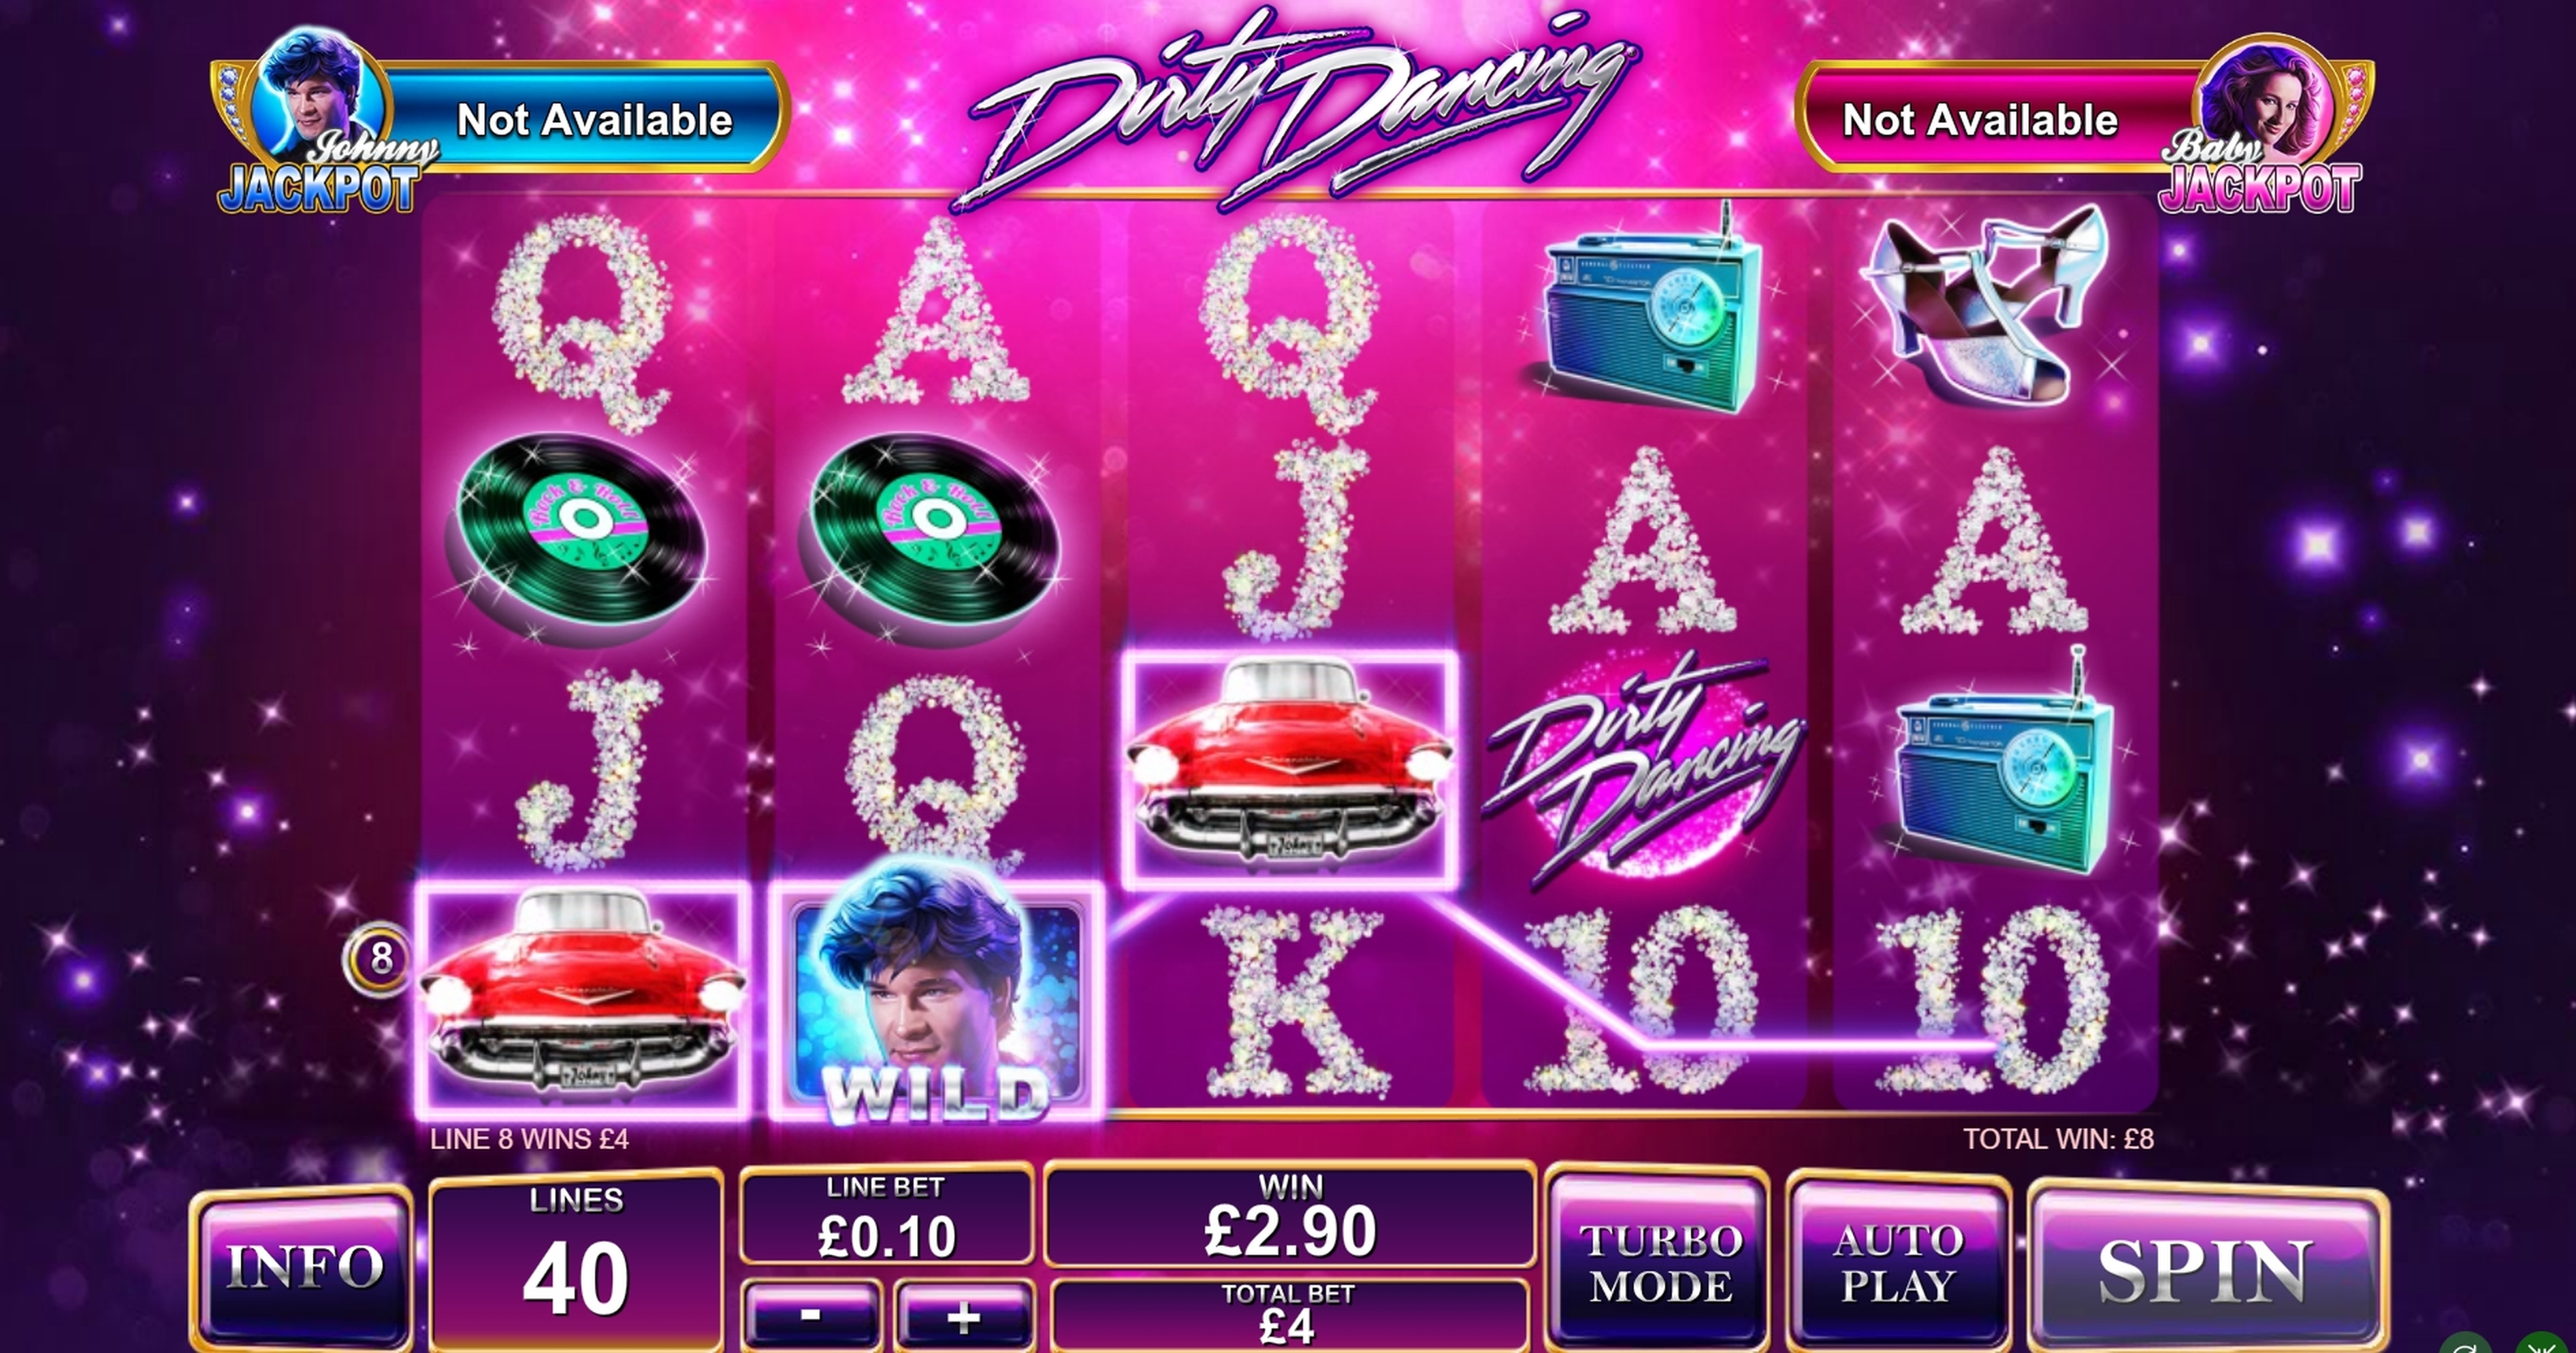 Win Money in Dirty Dancing Free Slot Game by Playtech